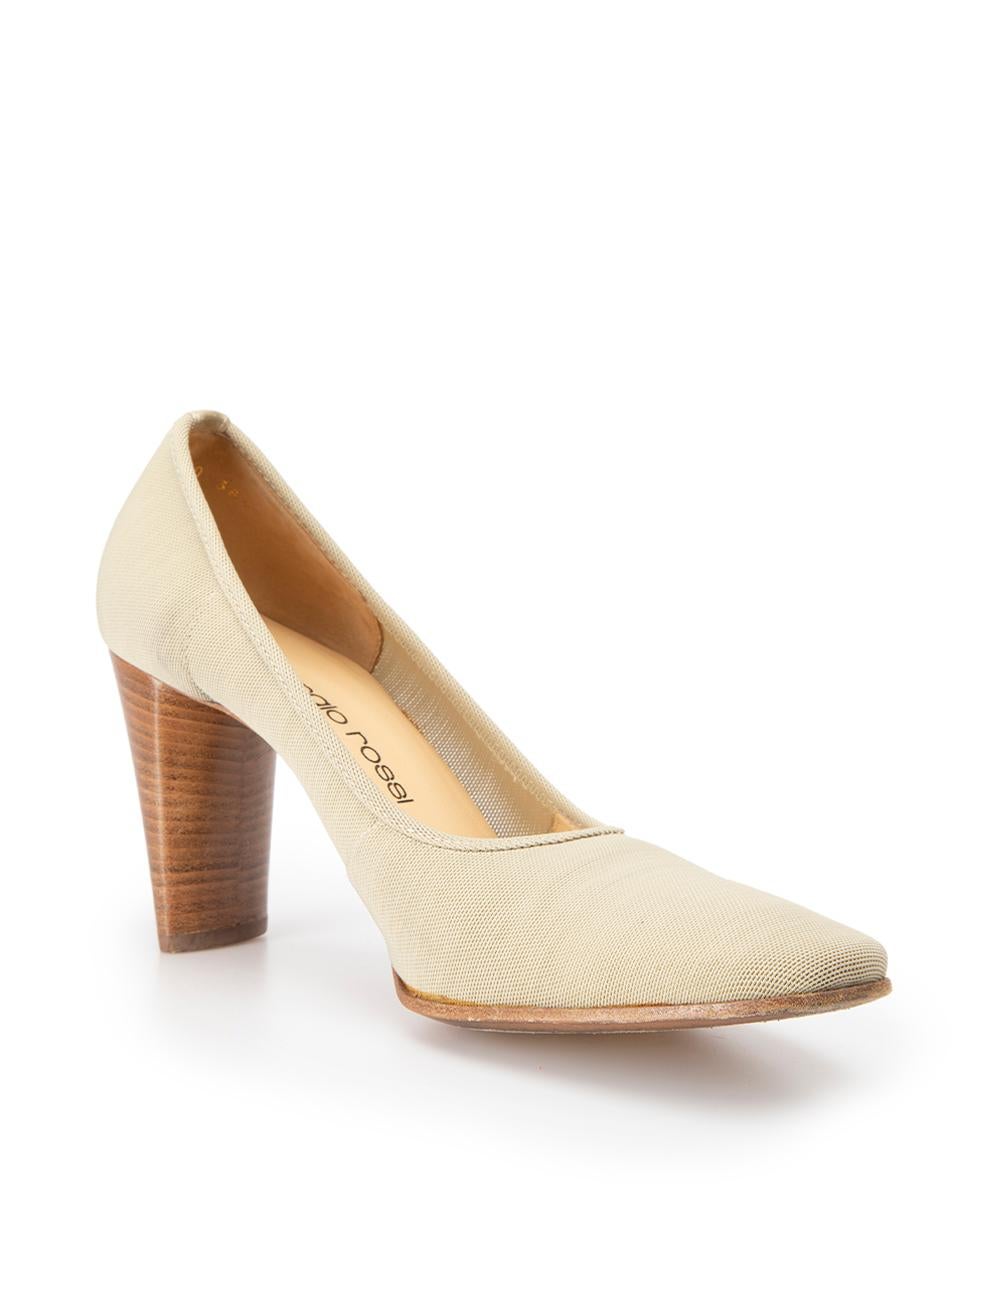 CONDITION is Very good. Minimal wear to shoes is evident. Light scuffs to heel blocks and light wear to soles on this used Sergio Rossi designer resale item. 
 
 Details
  Beige
 Canvas
 Slip on pumps
 Round-square toe
 High heel
 Leather interior
